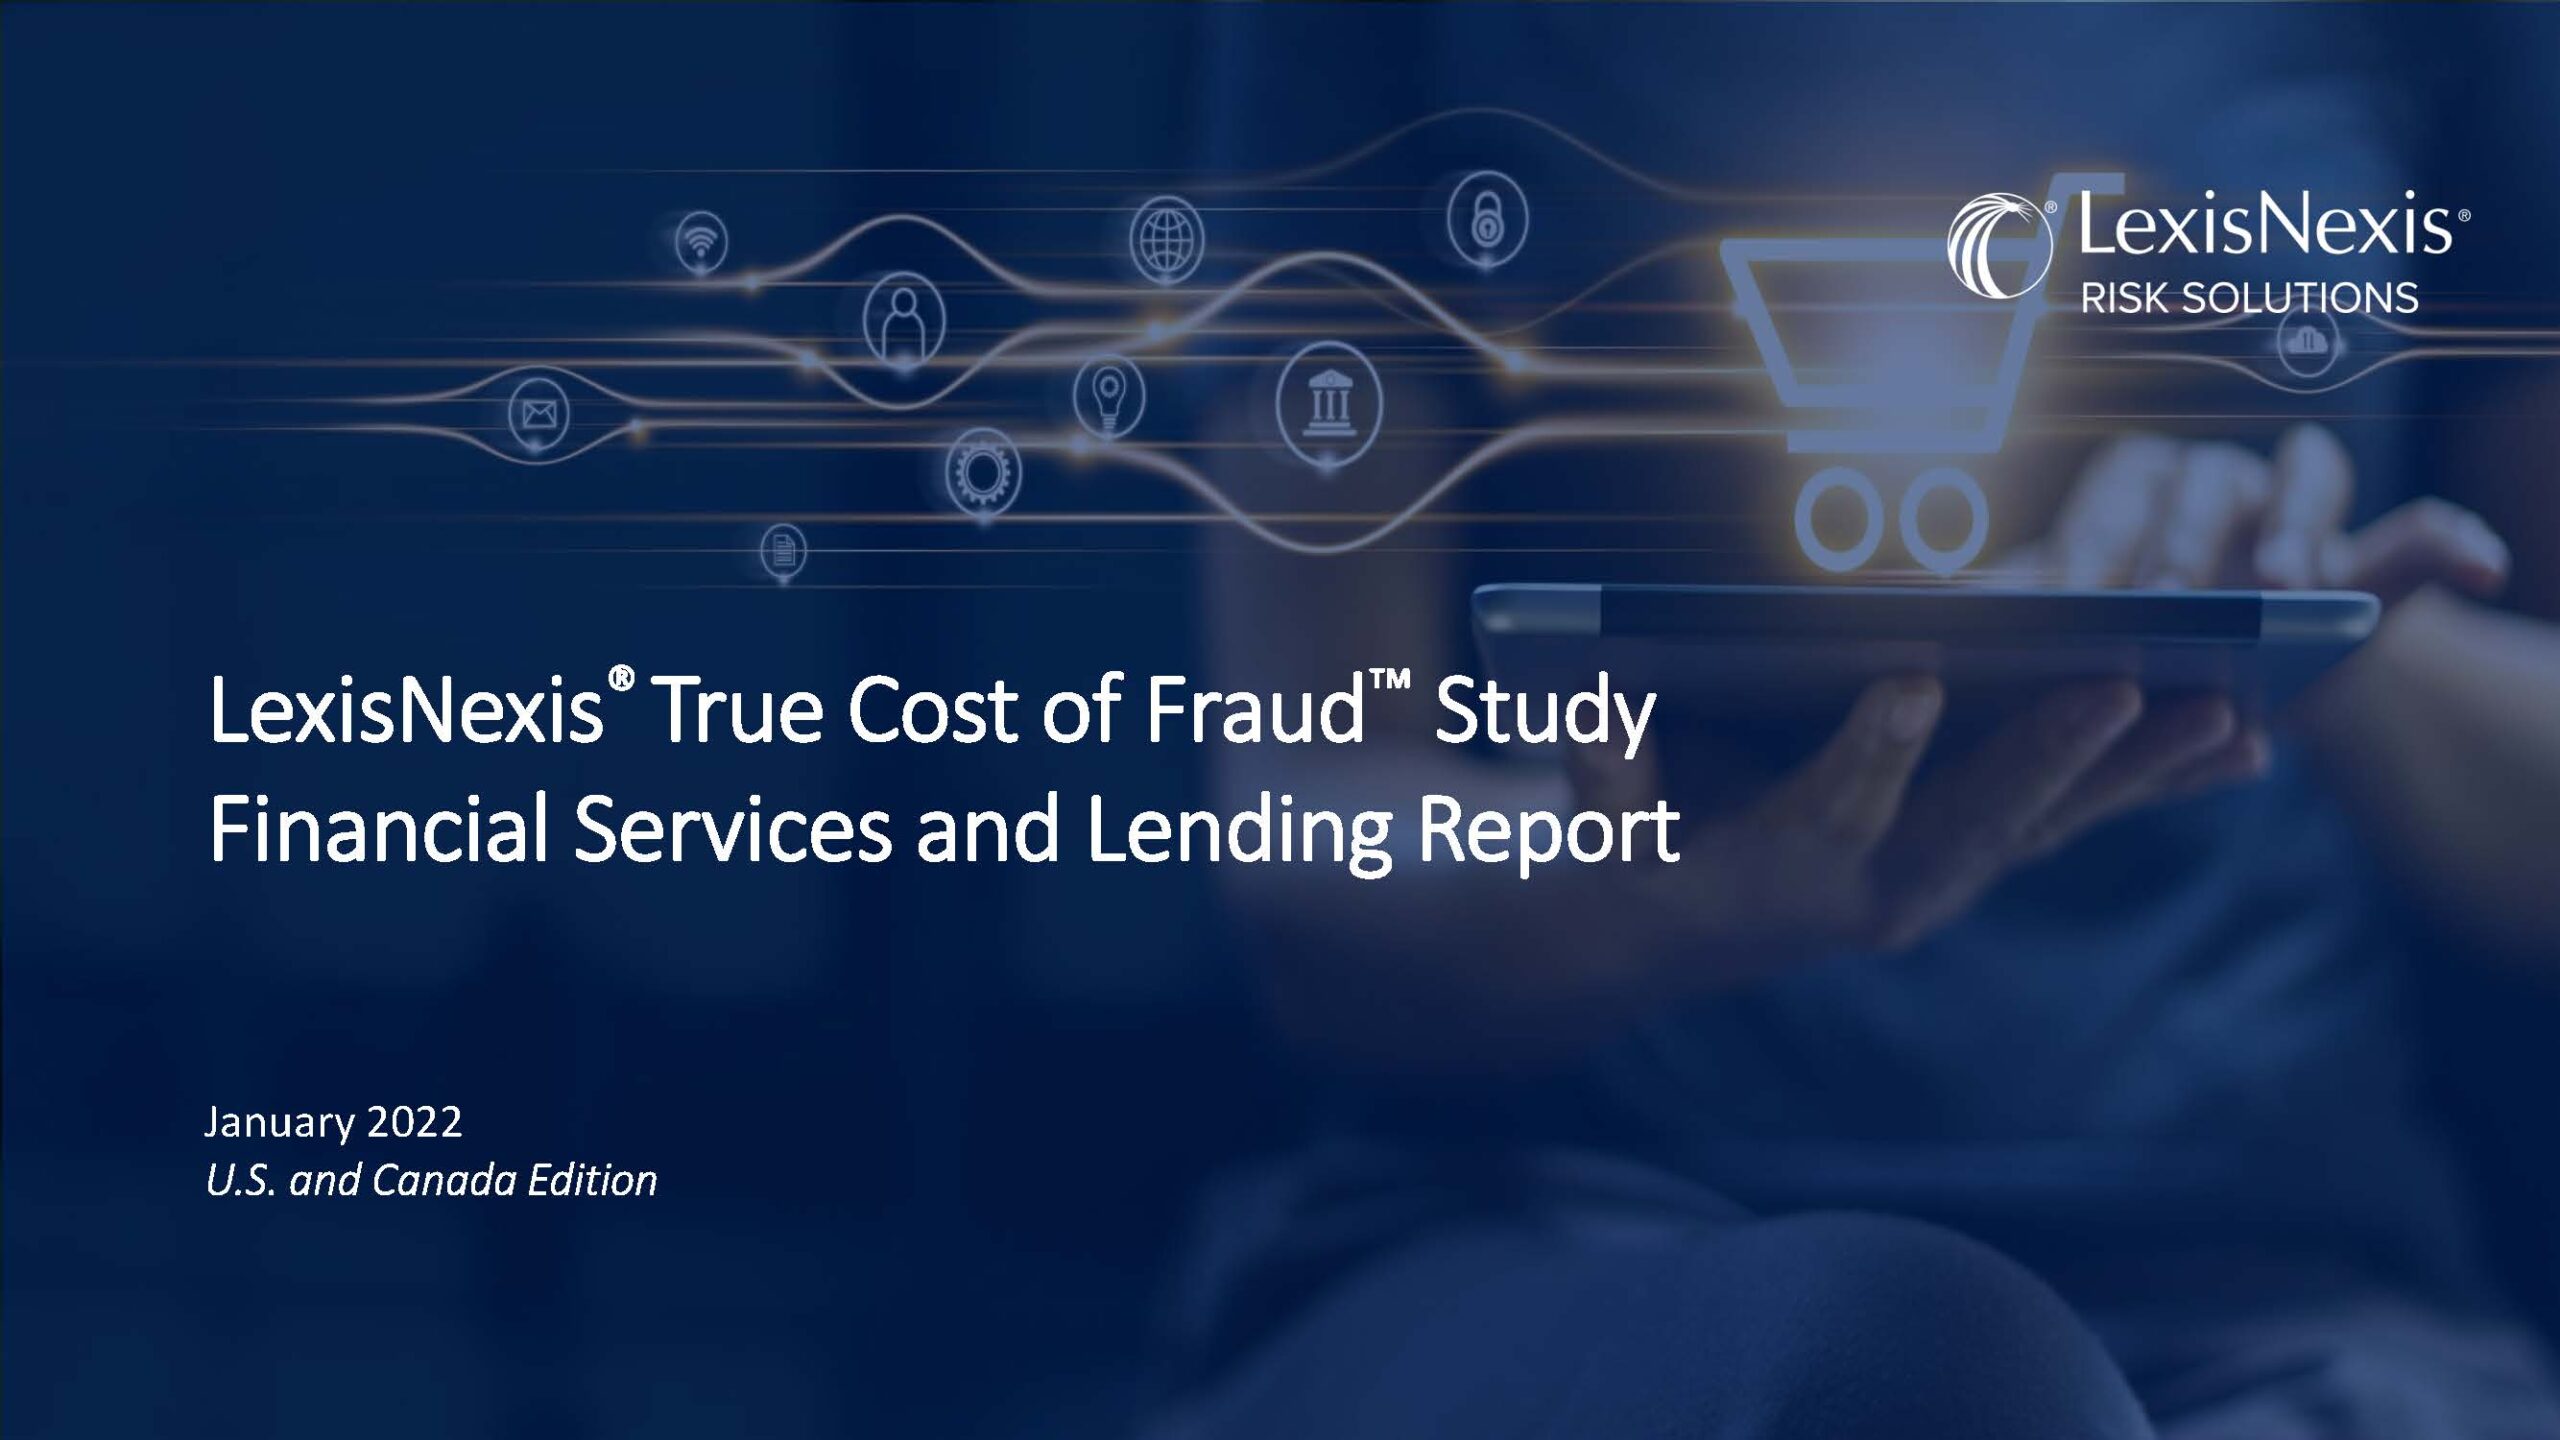 LNRS_True-Cost-of-Fraud-Financial-Services-and-Lending-2021_Research_Page_01